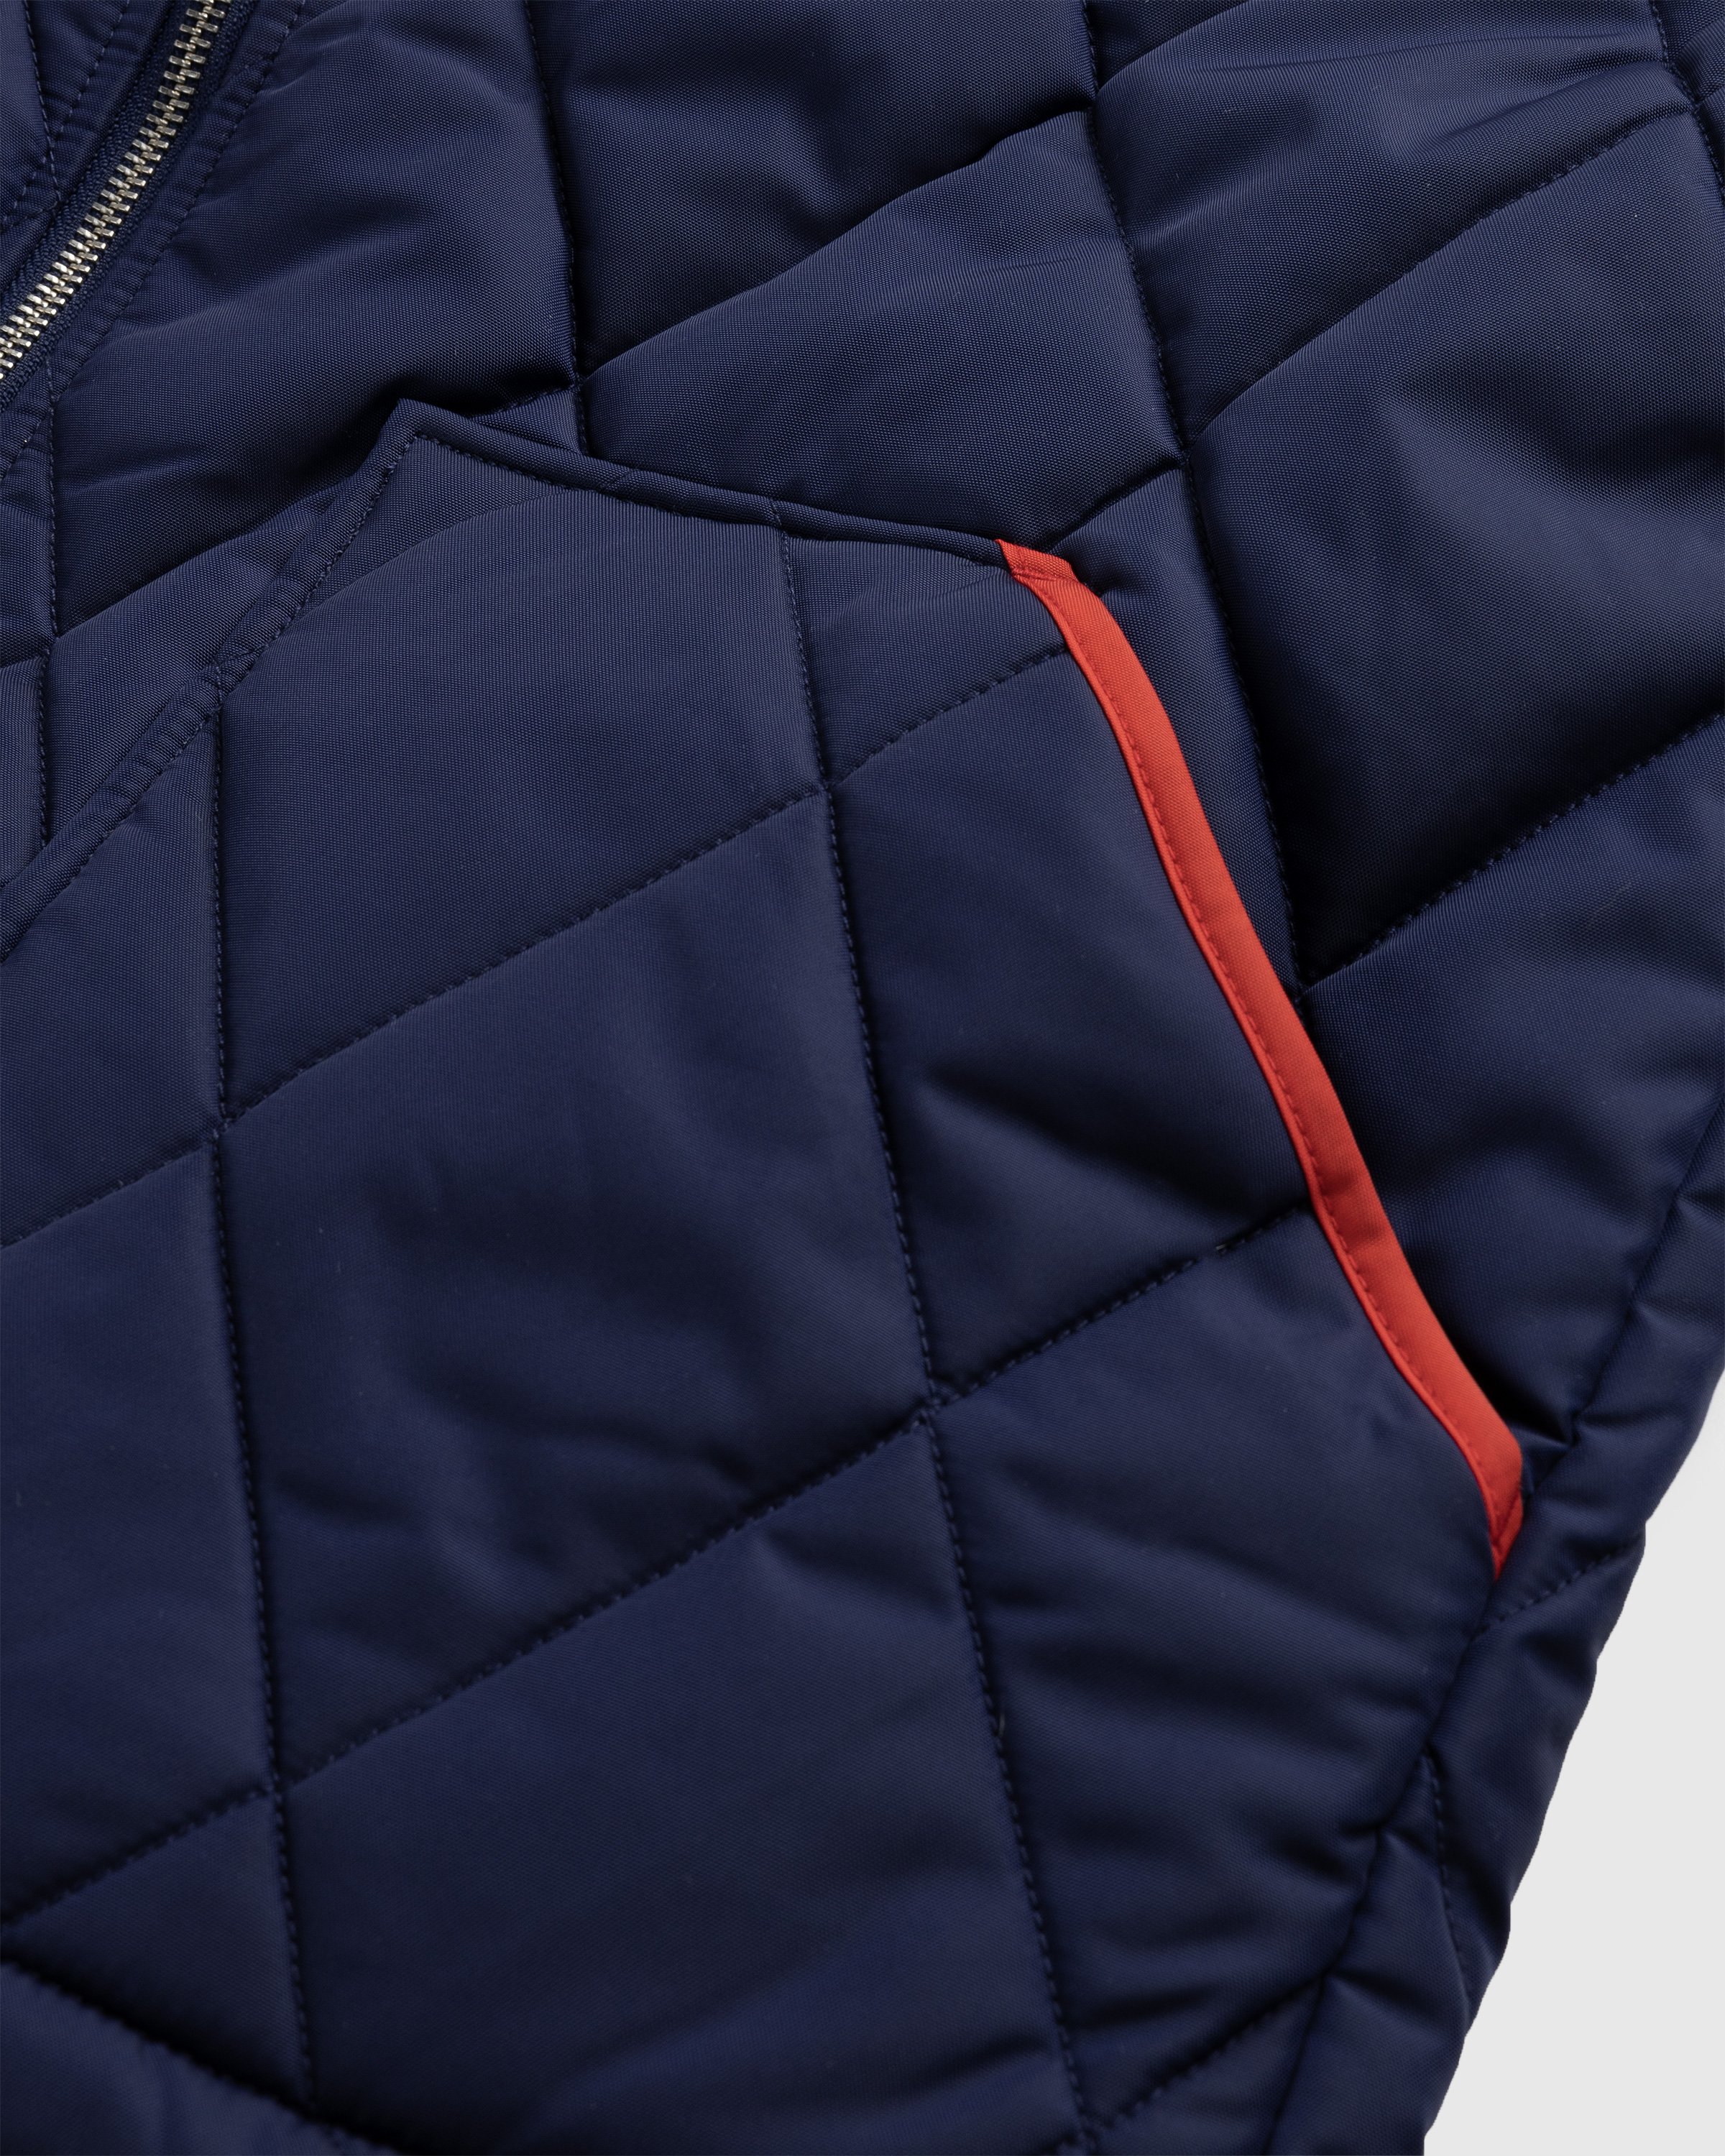 Puma x Noah - Water-Repellent Quilted Jacket Navy - Clothing - Blue - Image 7